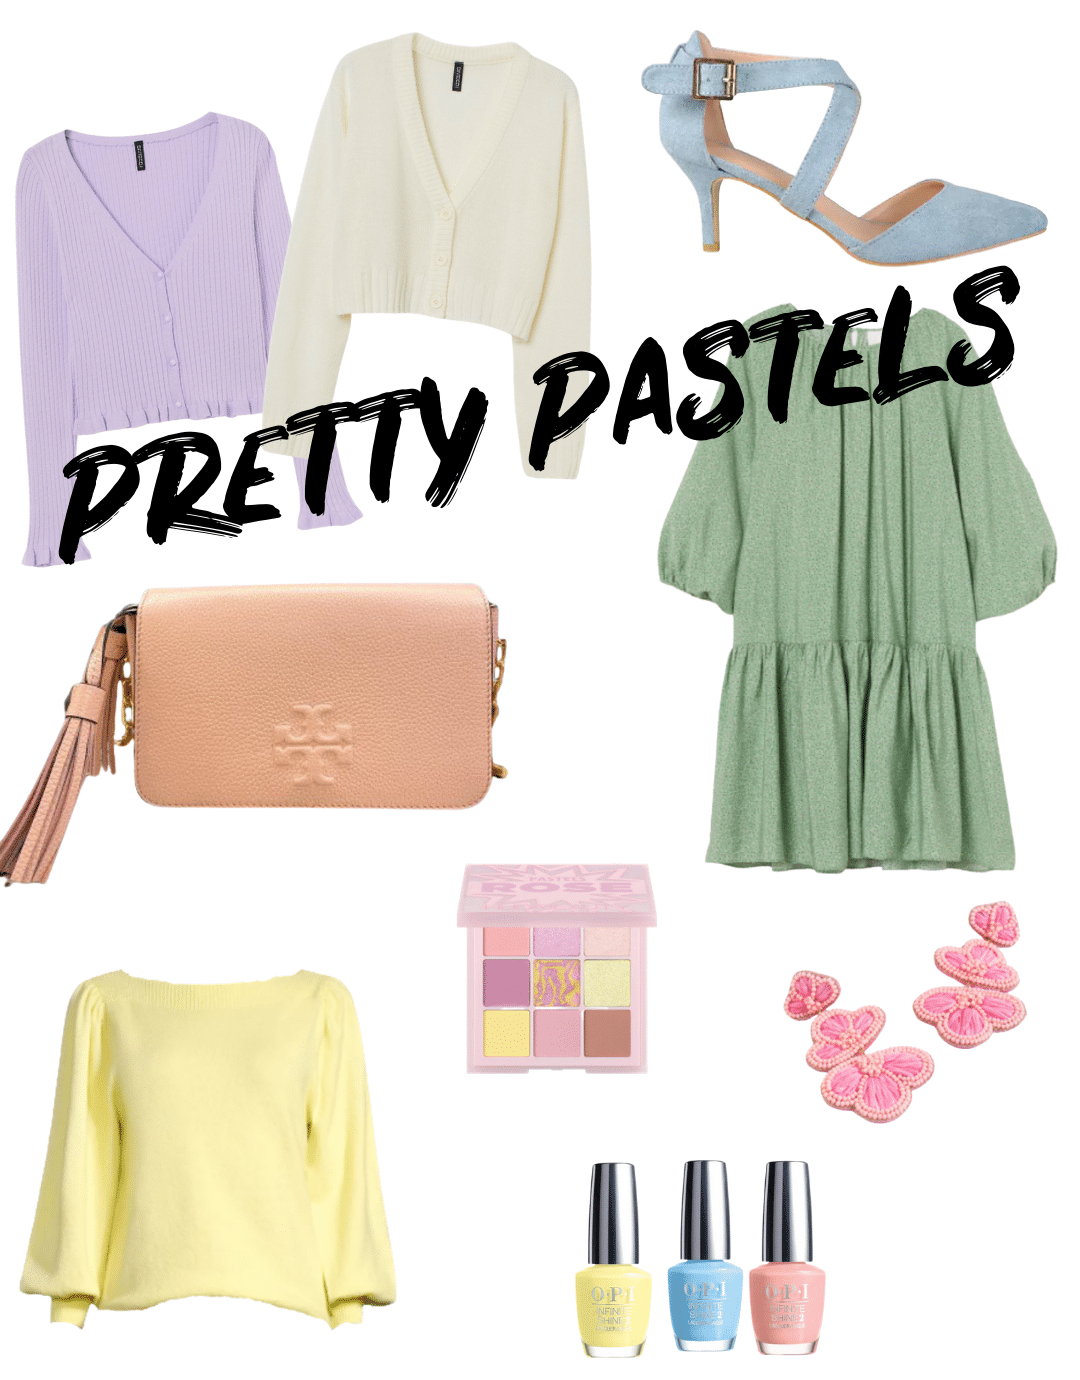 Spring Style: Pastels